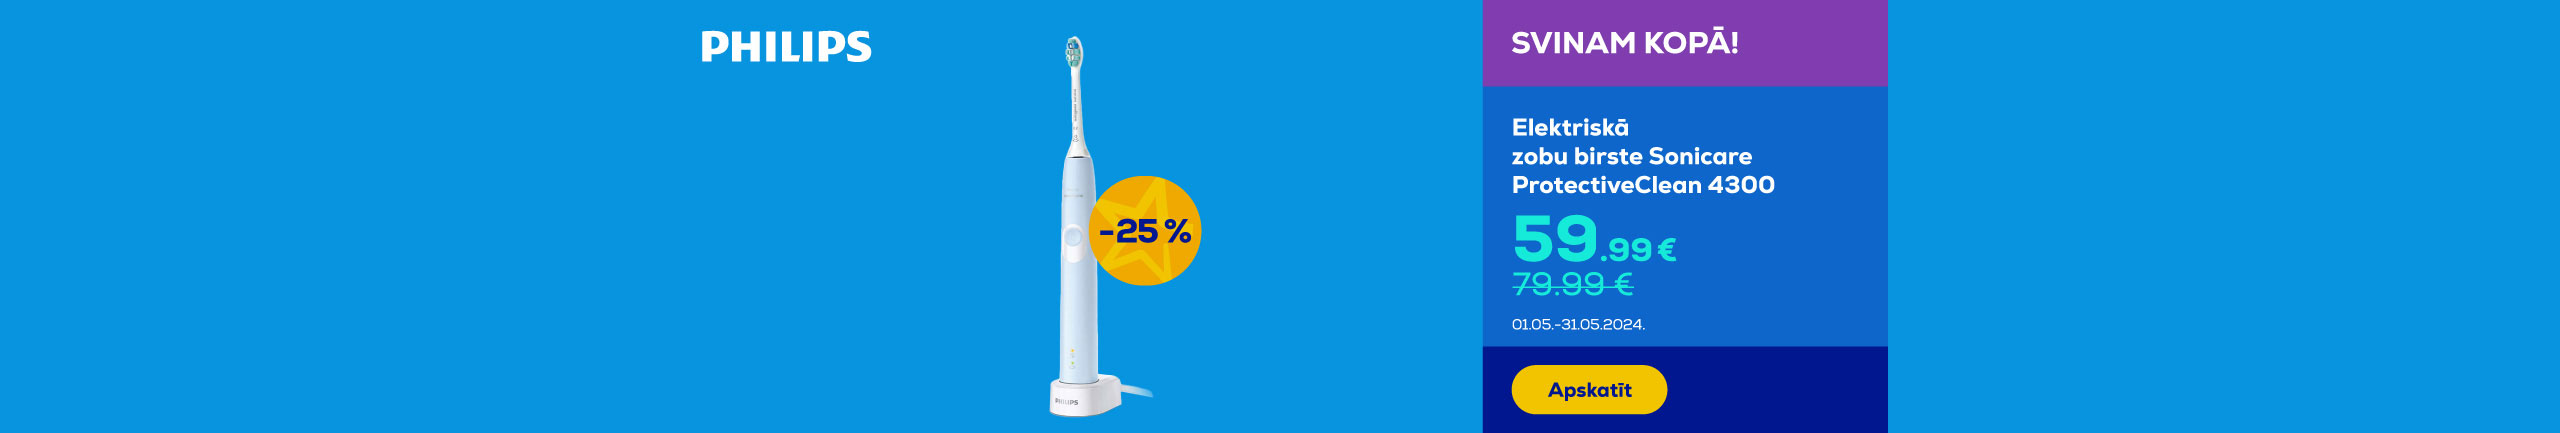 GR sonicare tooth